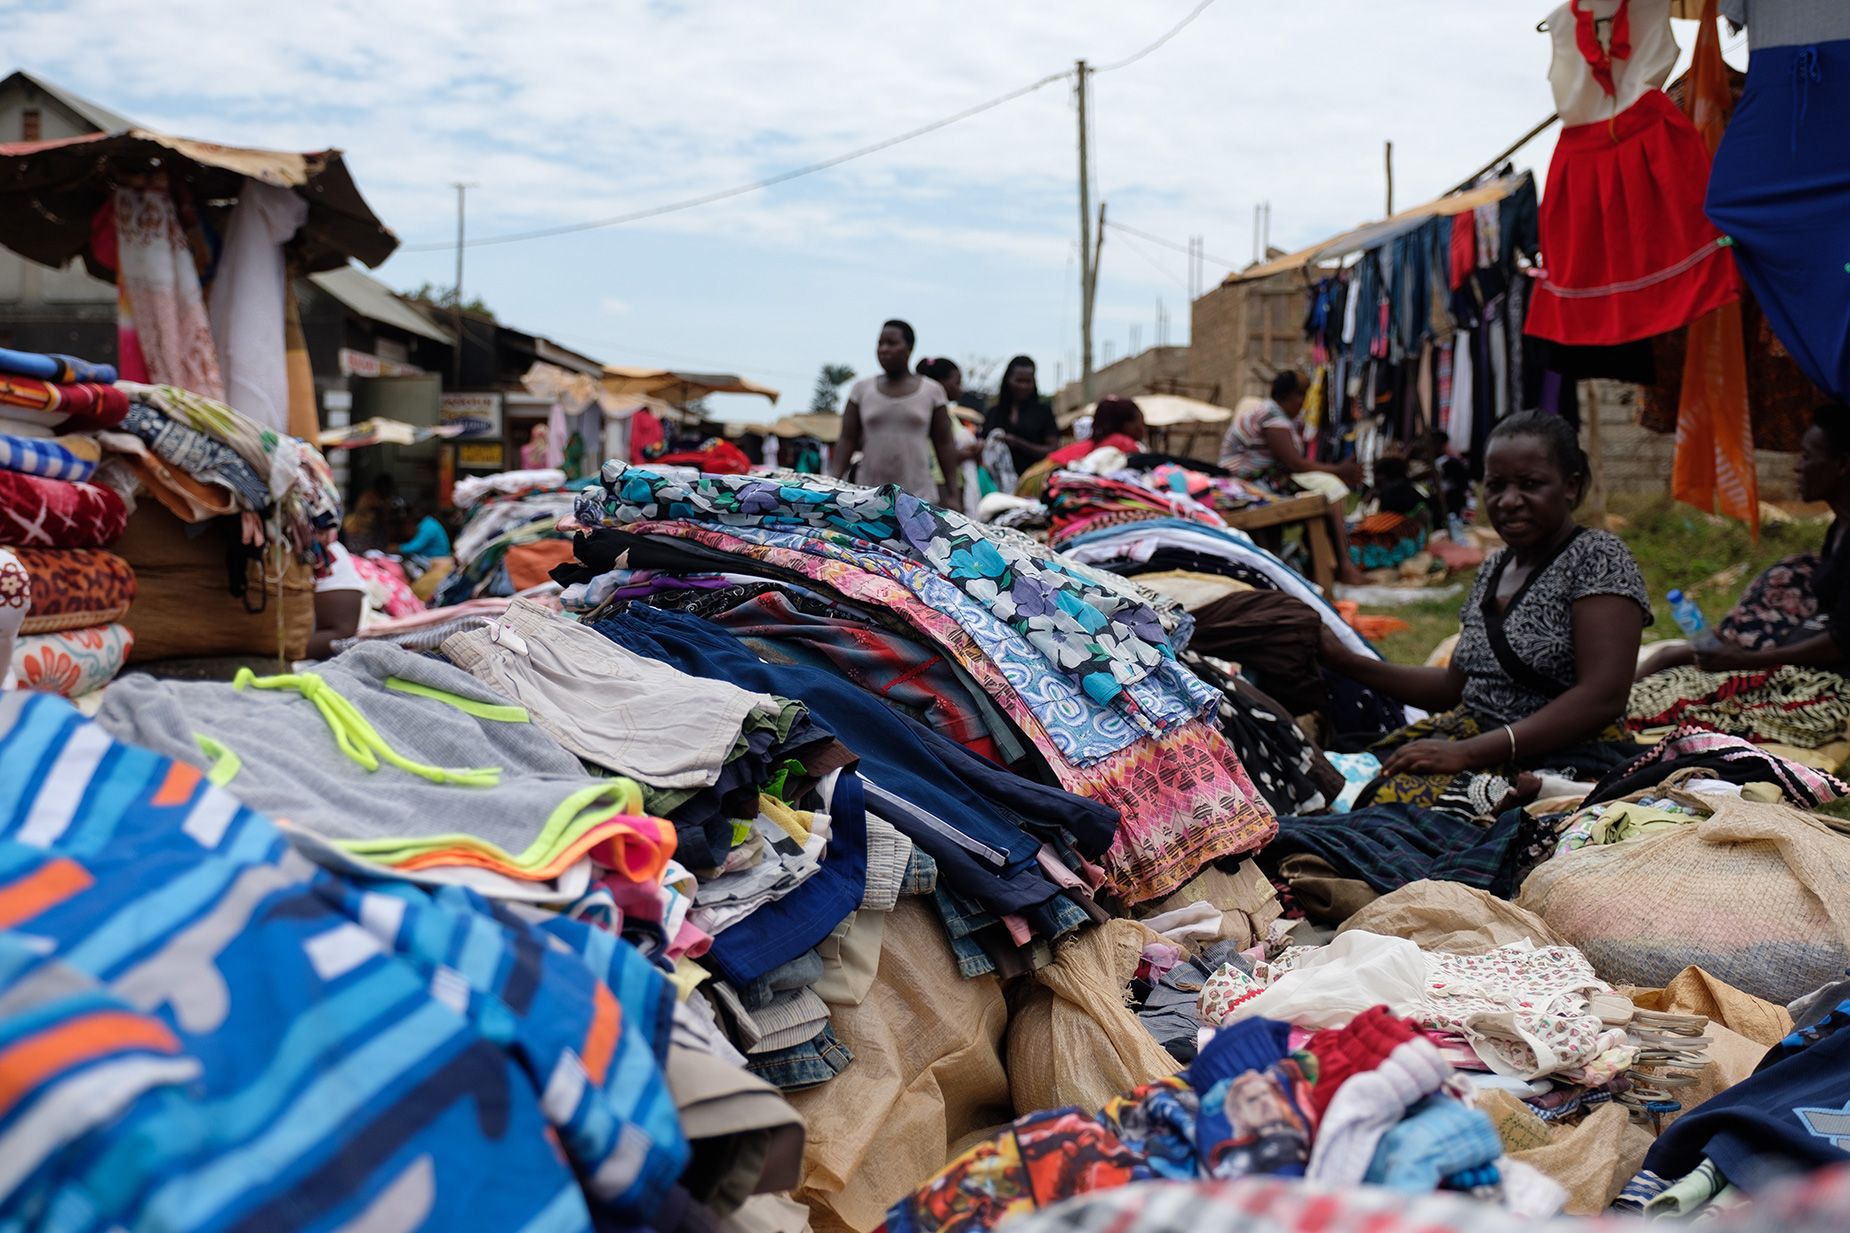 ENTEBBE, KAMPALA DISTRICT, UGANDA - SEPTEMBRE 21: Second hand clothes to sell in a local market on Septembre 21, 2018 in Entebbe, Kampala district, Uganda. (Photo by Camille Delbos/Art In All of Us/Corbis via Getty Images)